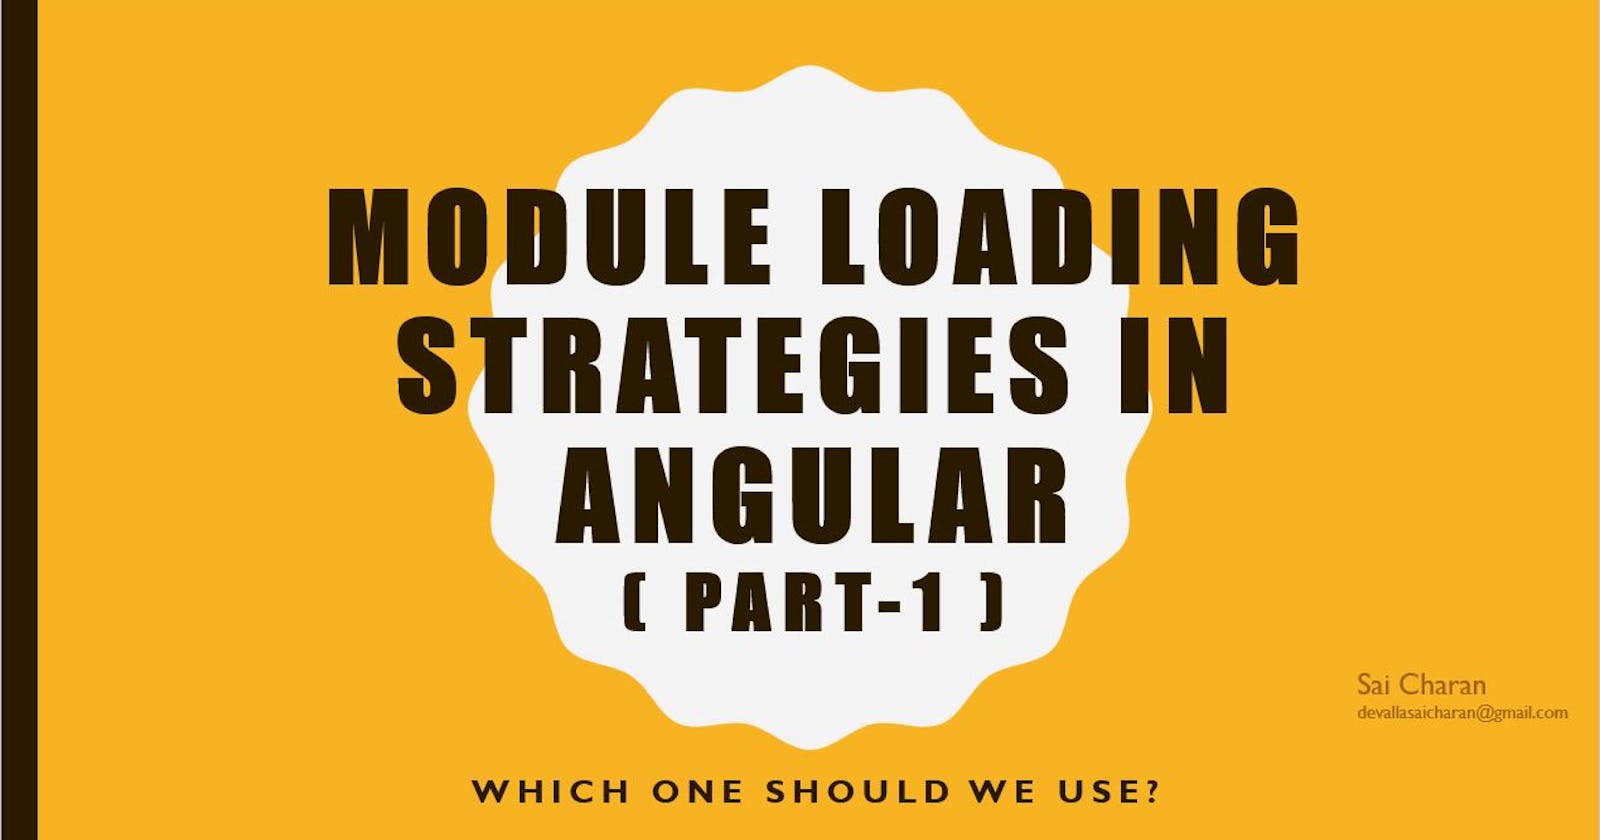 Different Module Loading Strategies in Angular, which one should we use? (Part 1)